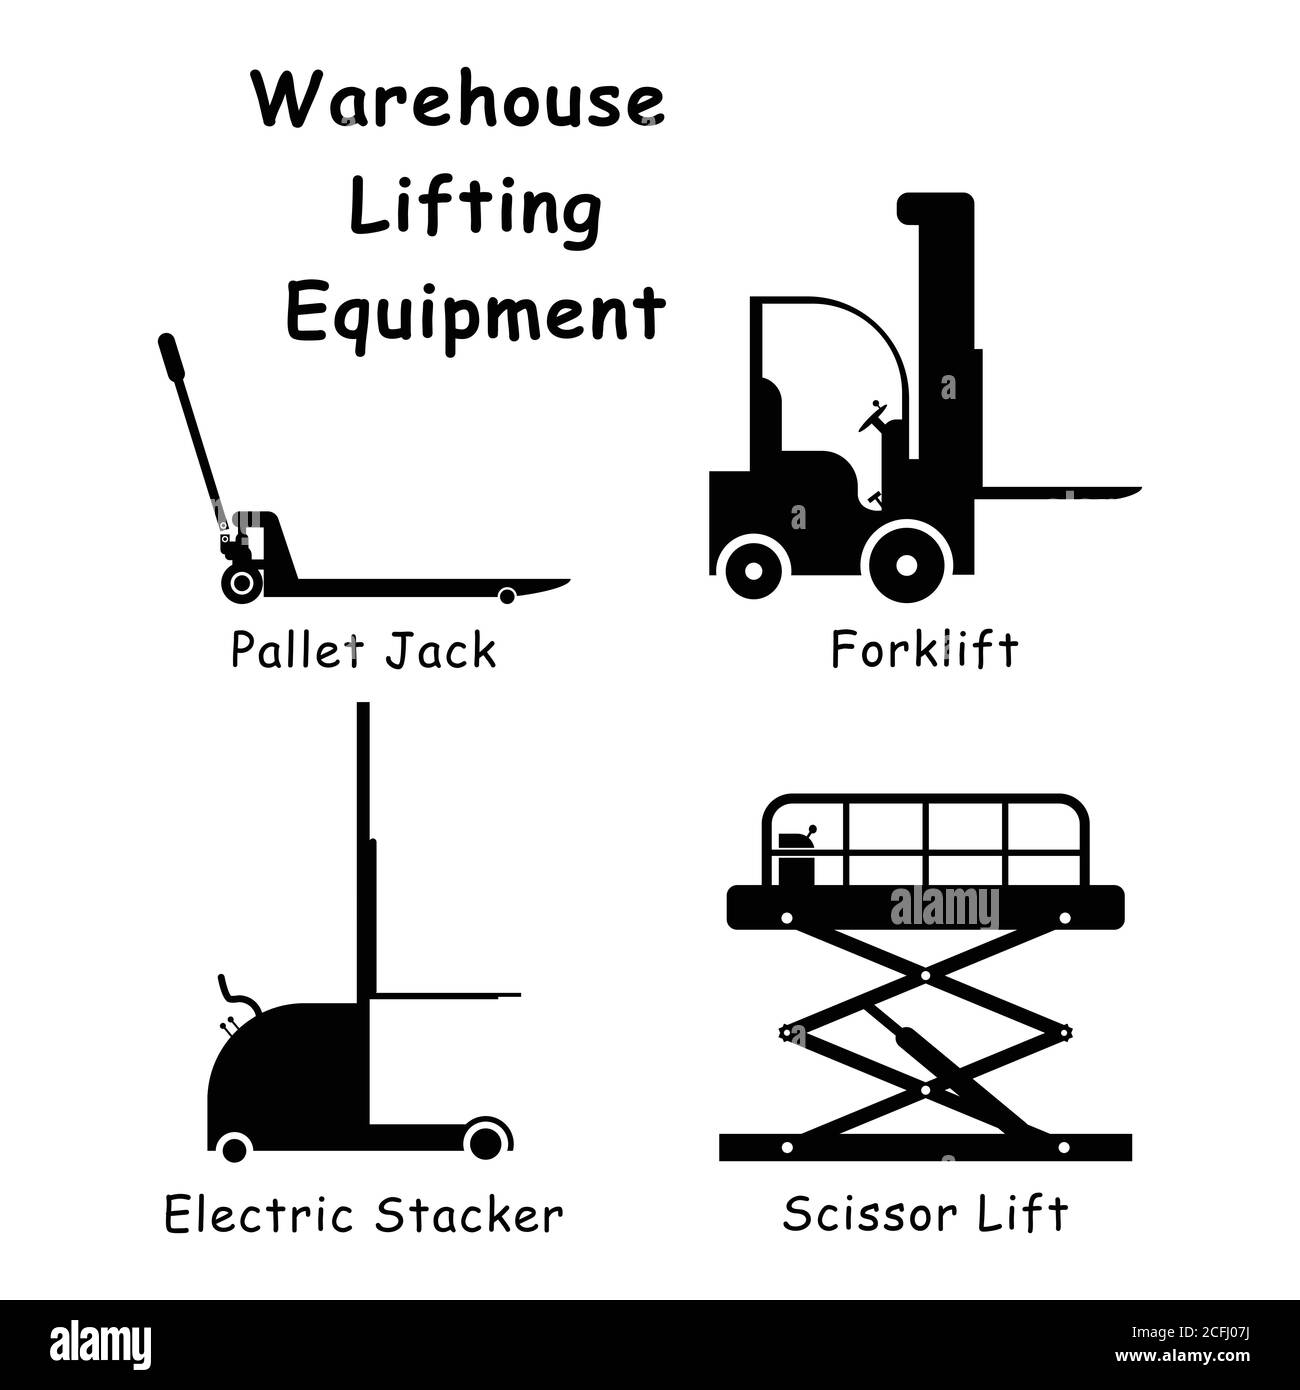 Warehouse Lifting Equipment. Black and white pictogram illustration depicting various factory warehouse lifting machines such as forklit, pallet jack, Stock Vector